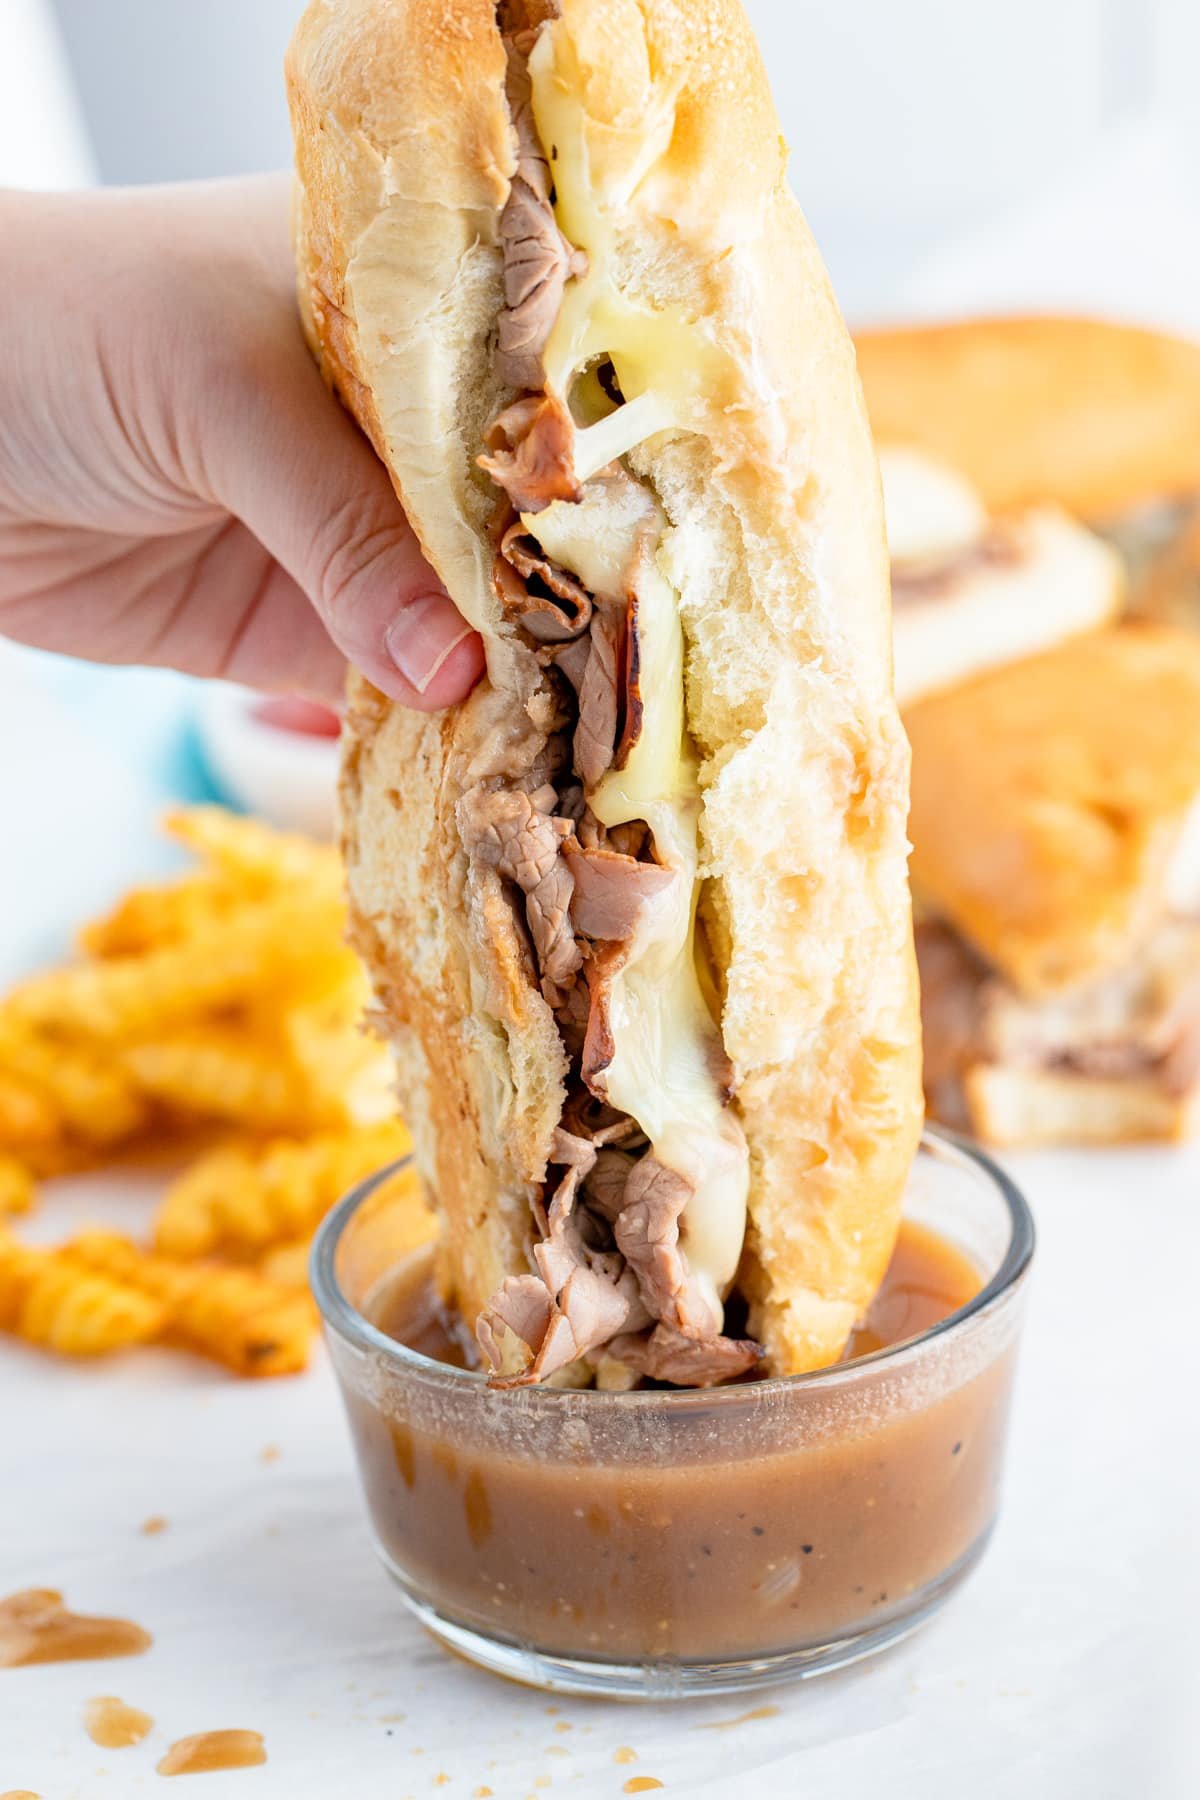 a hand dipping french dipped sandwich recipe into au jus